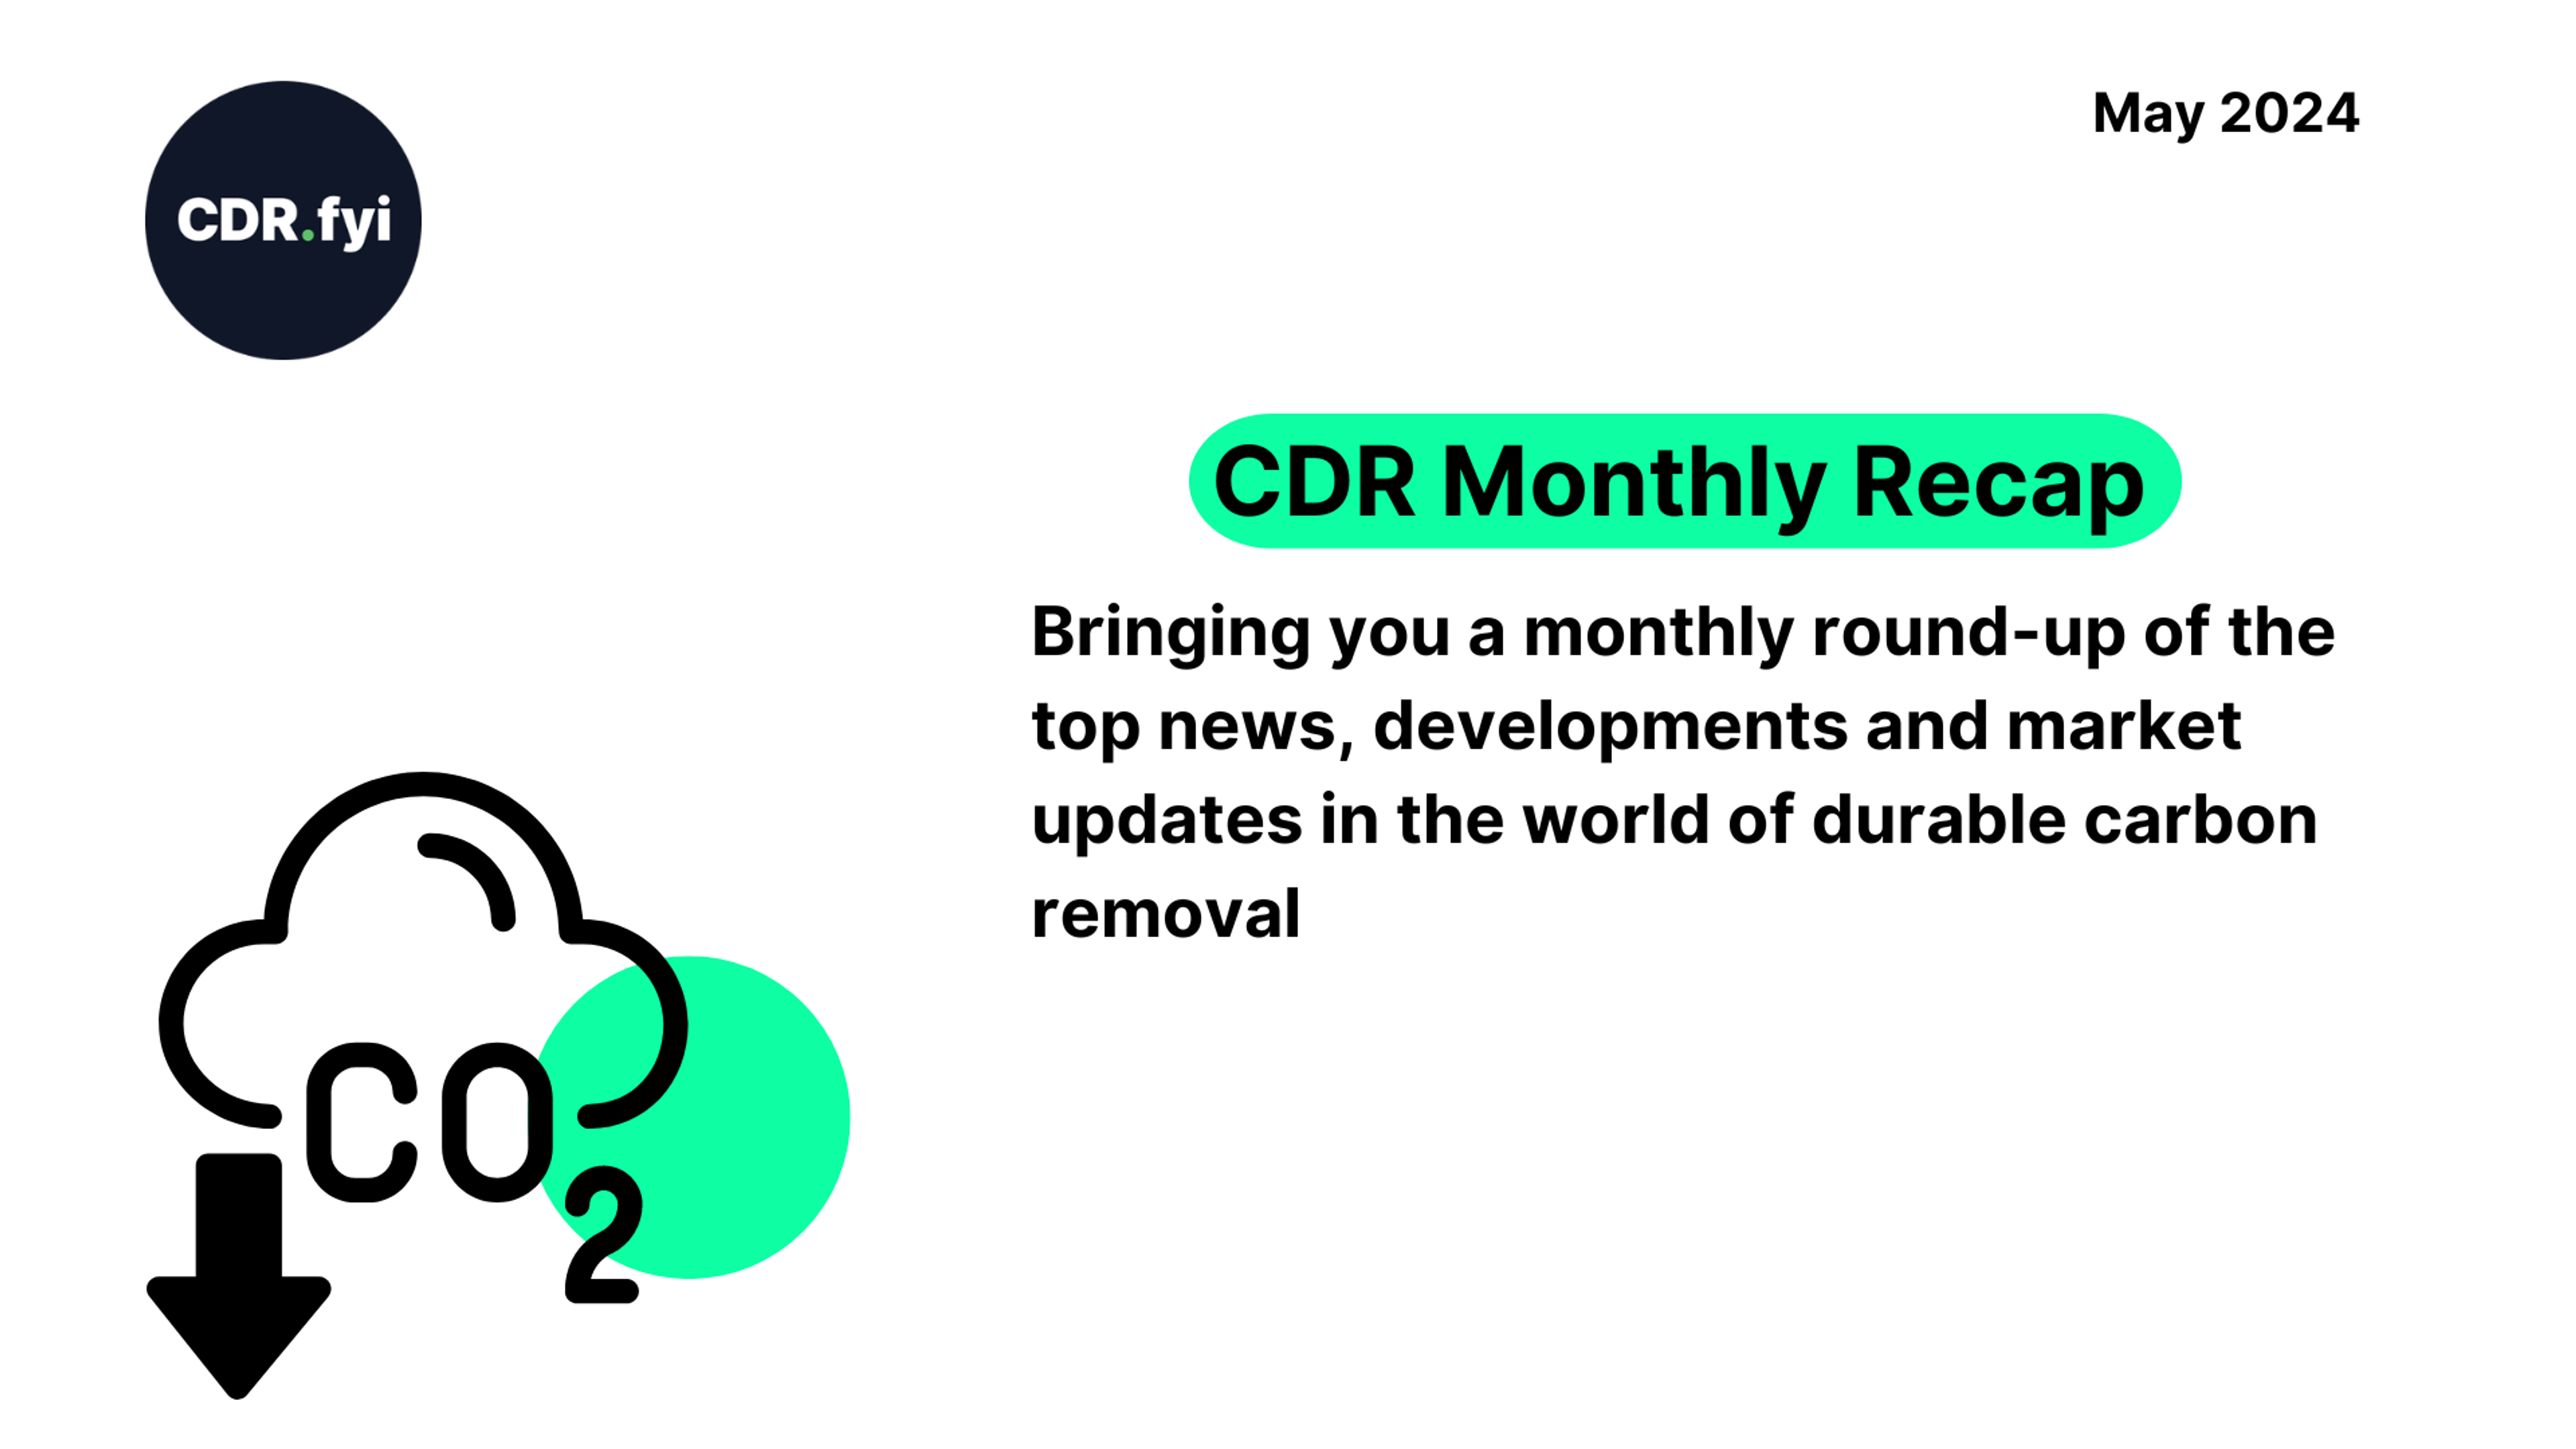 CDR Monthly Recap - May 2024 blog post image